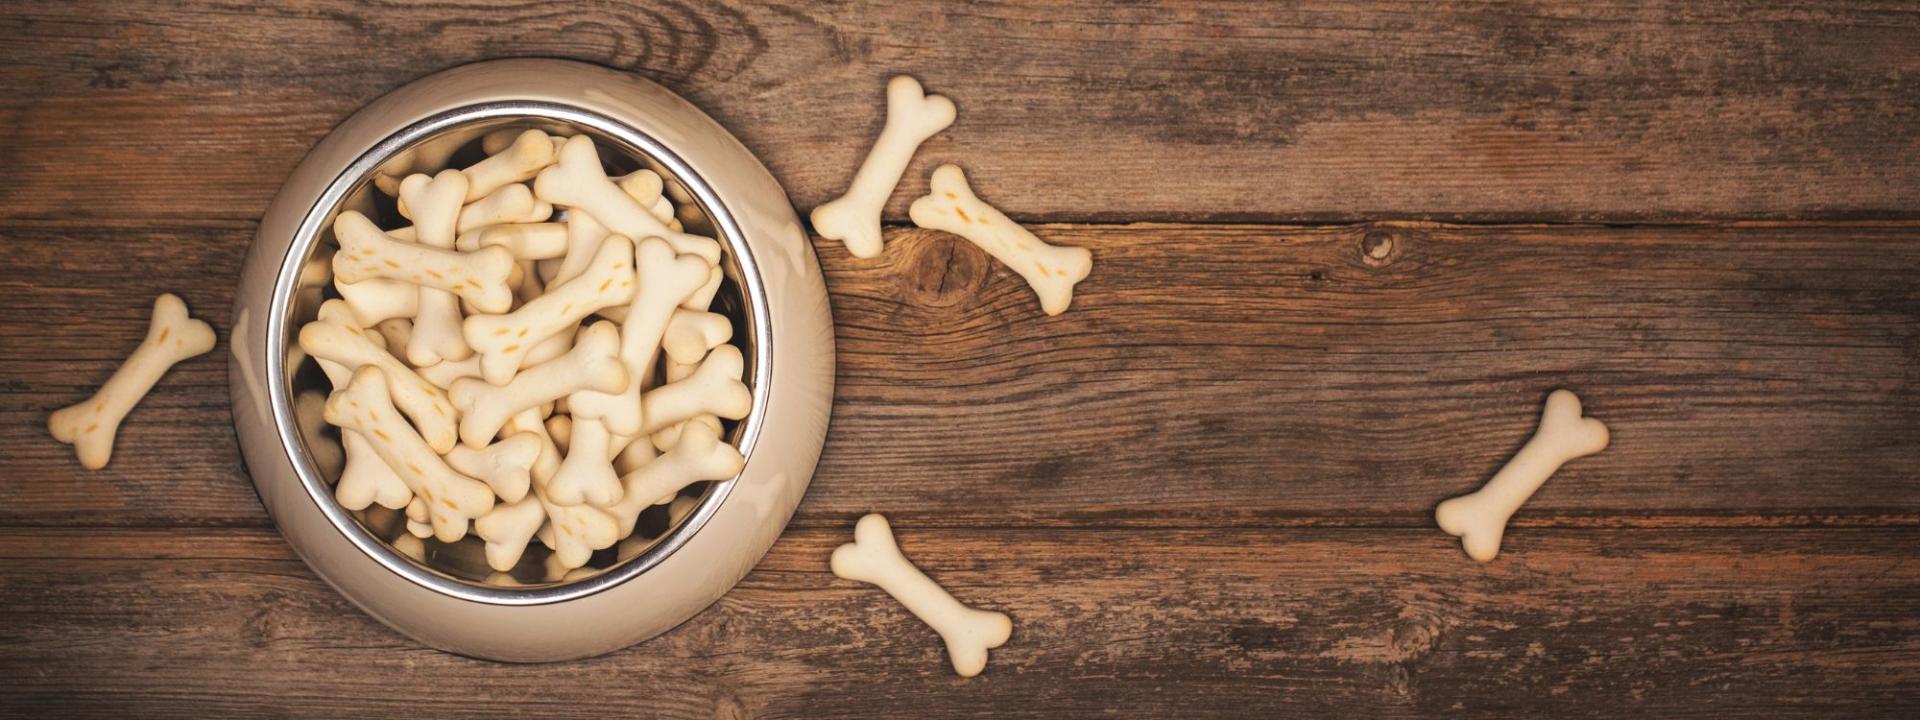 A bowl of dog biscuits on a wood floor